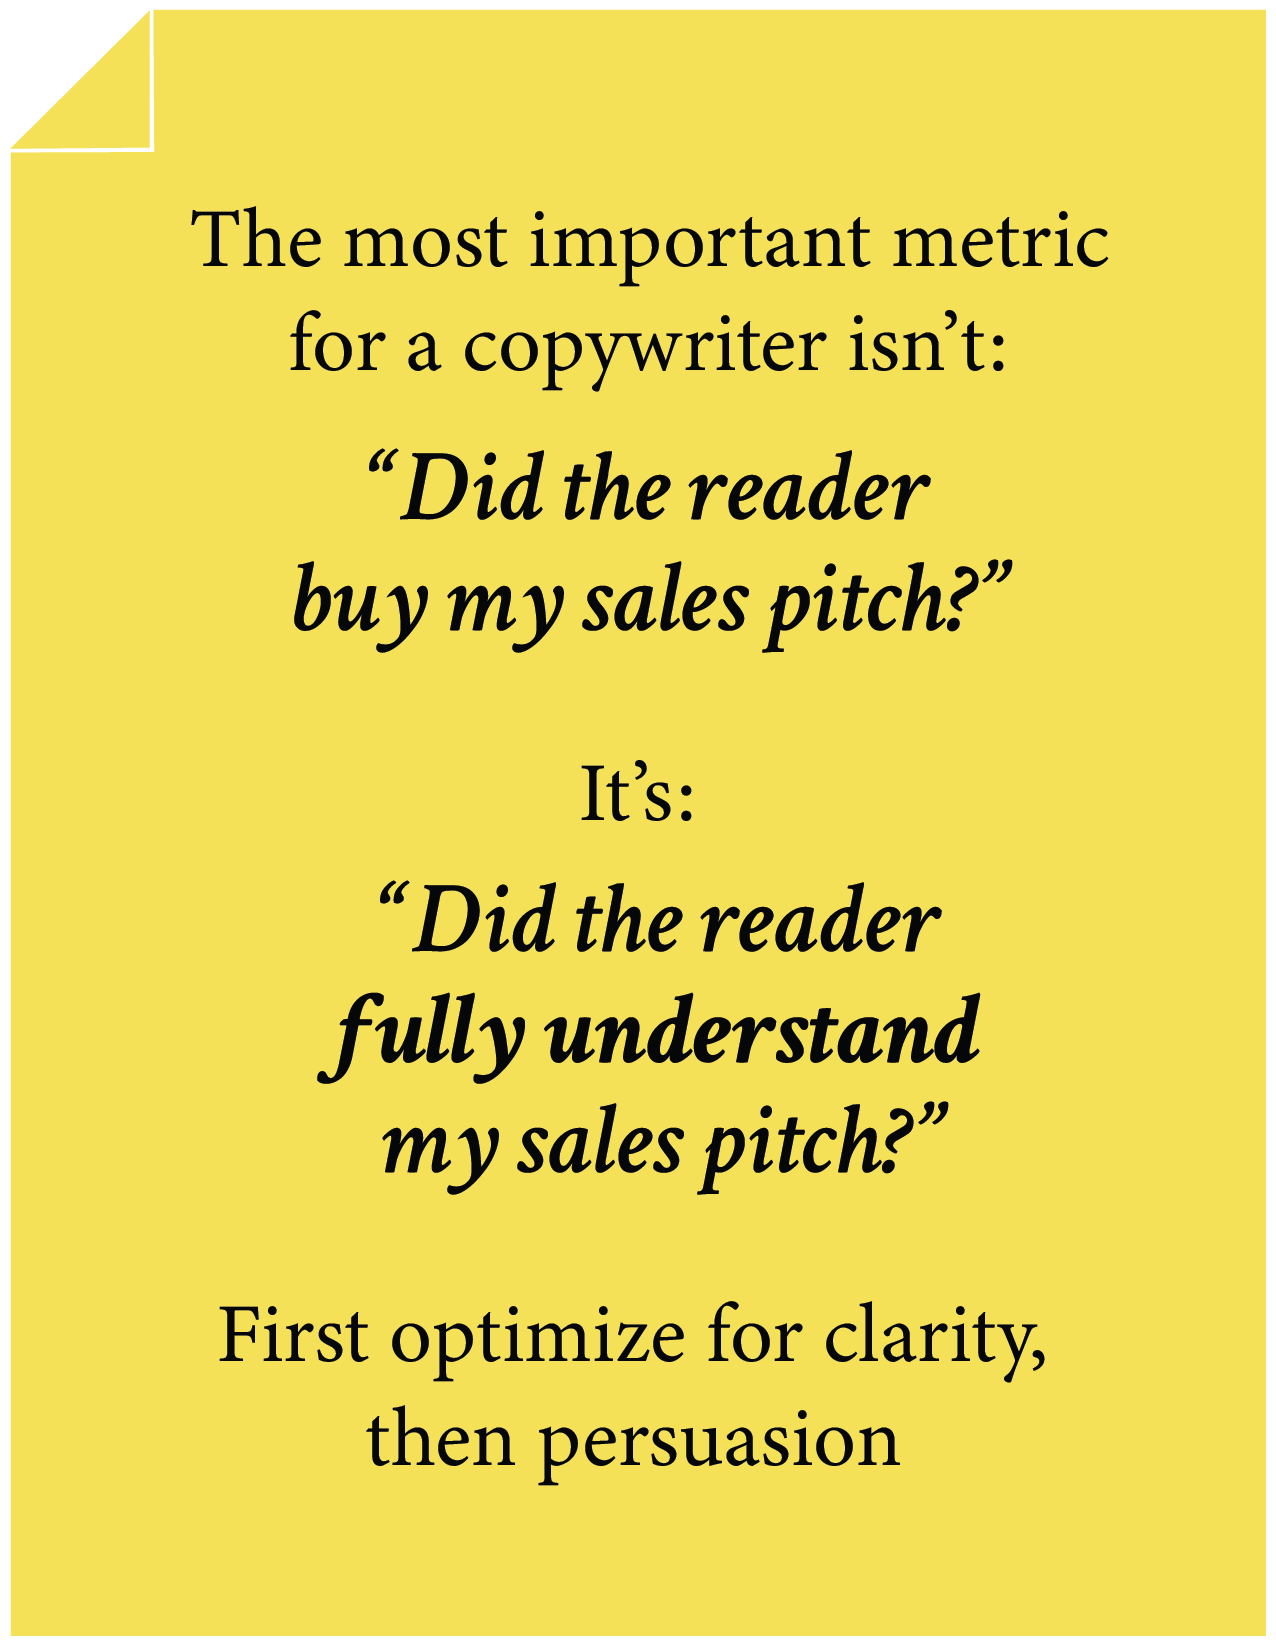 Most Important Metric for Copywriter